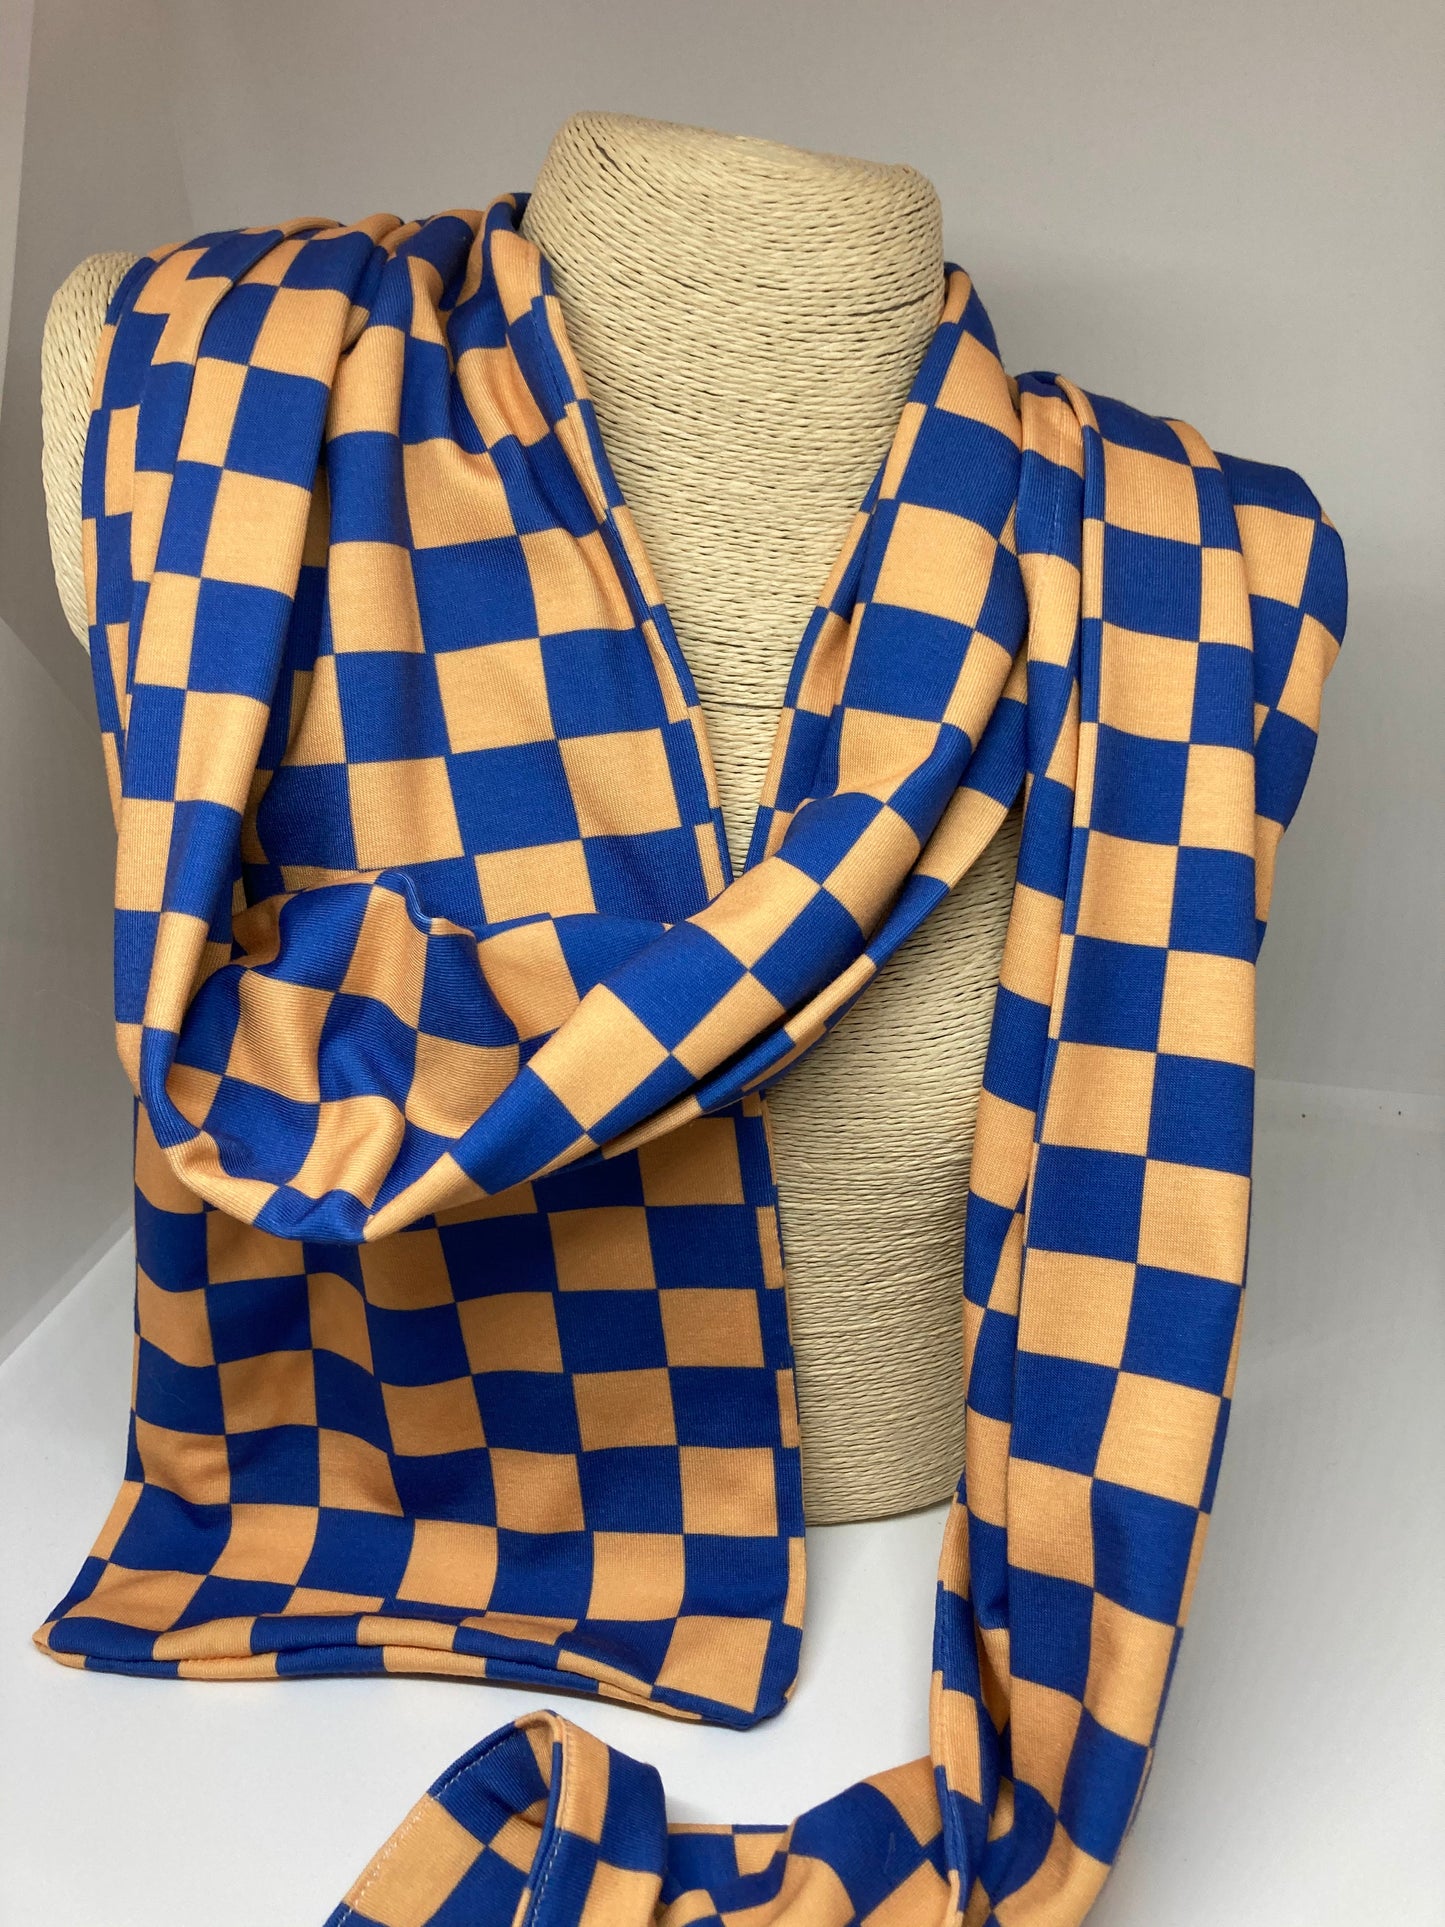 Handmade Scarf in "Blue and Gold check"